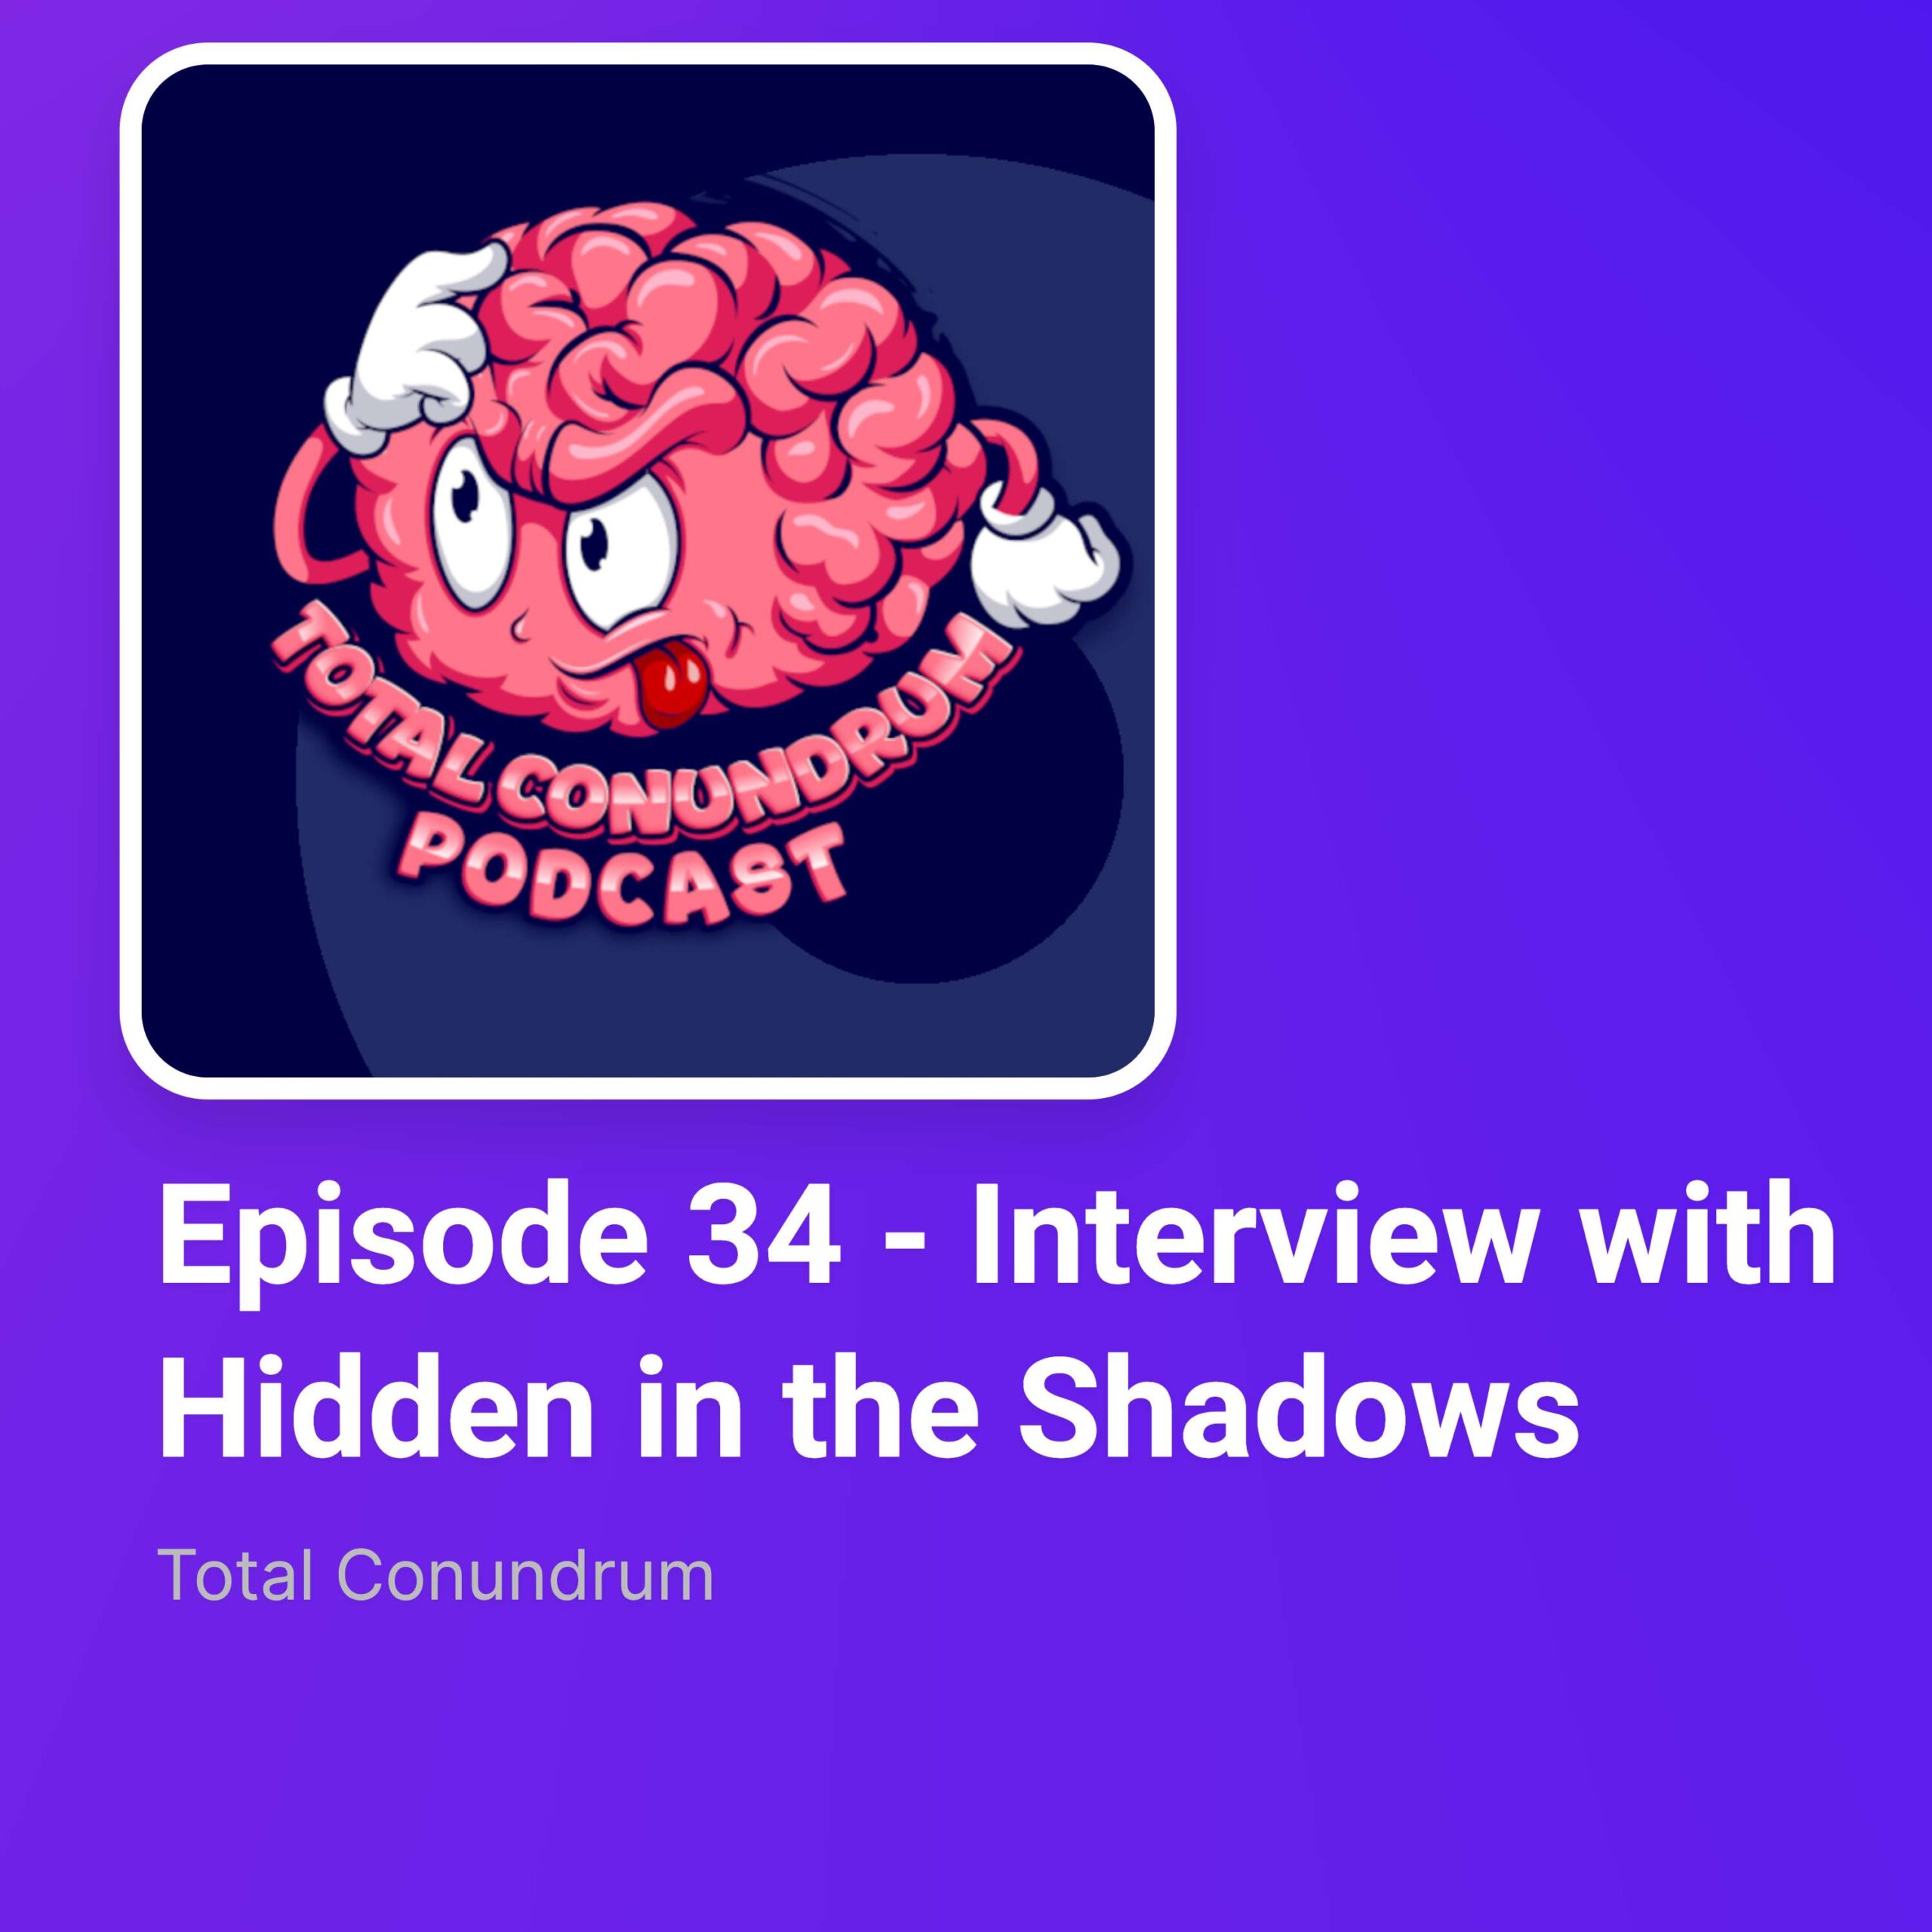 Episode 34 - Interview with Hidden in the Shadows